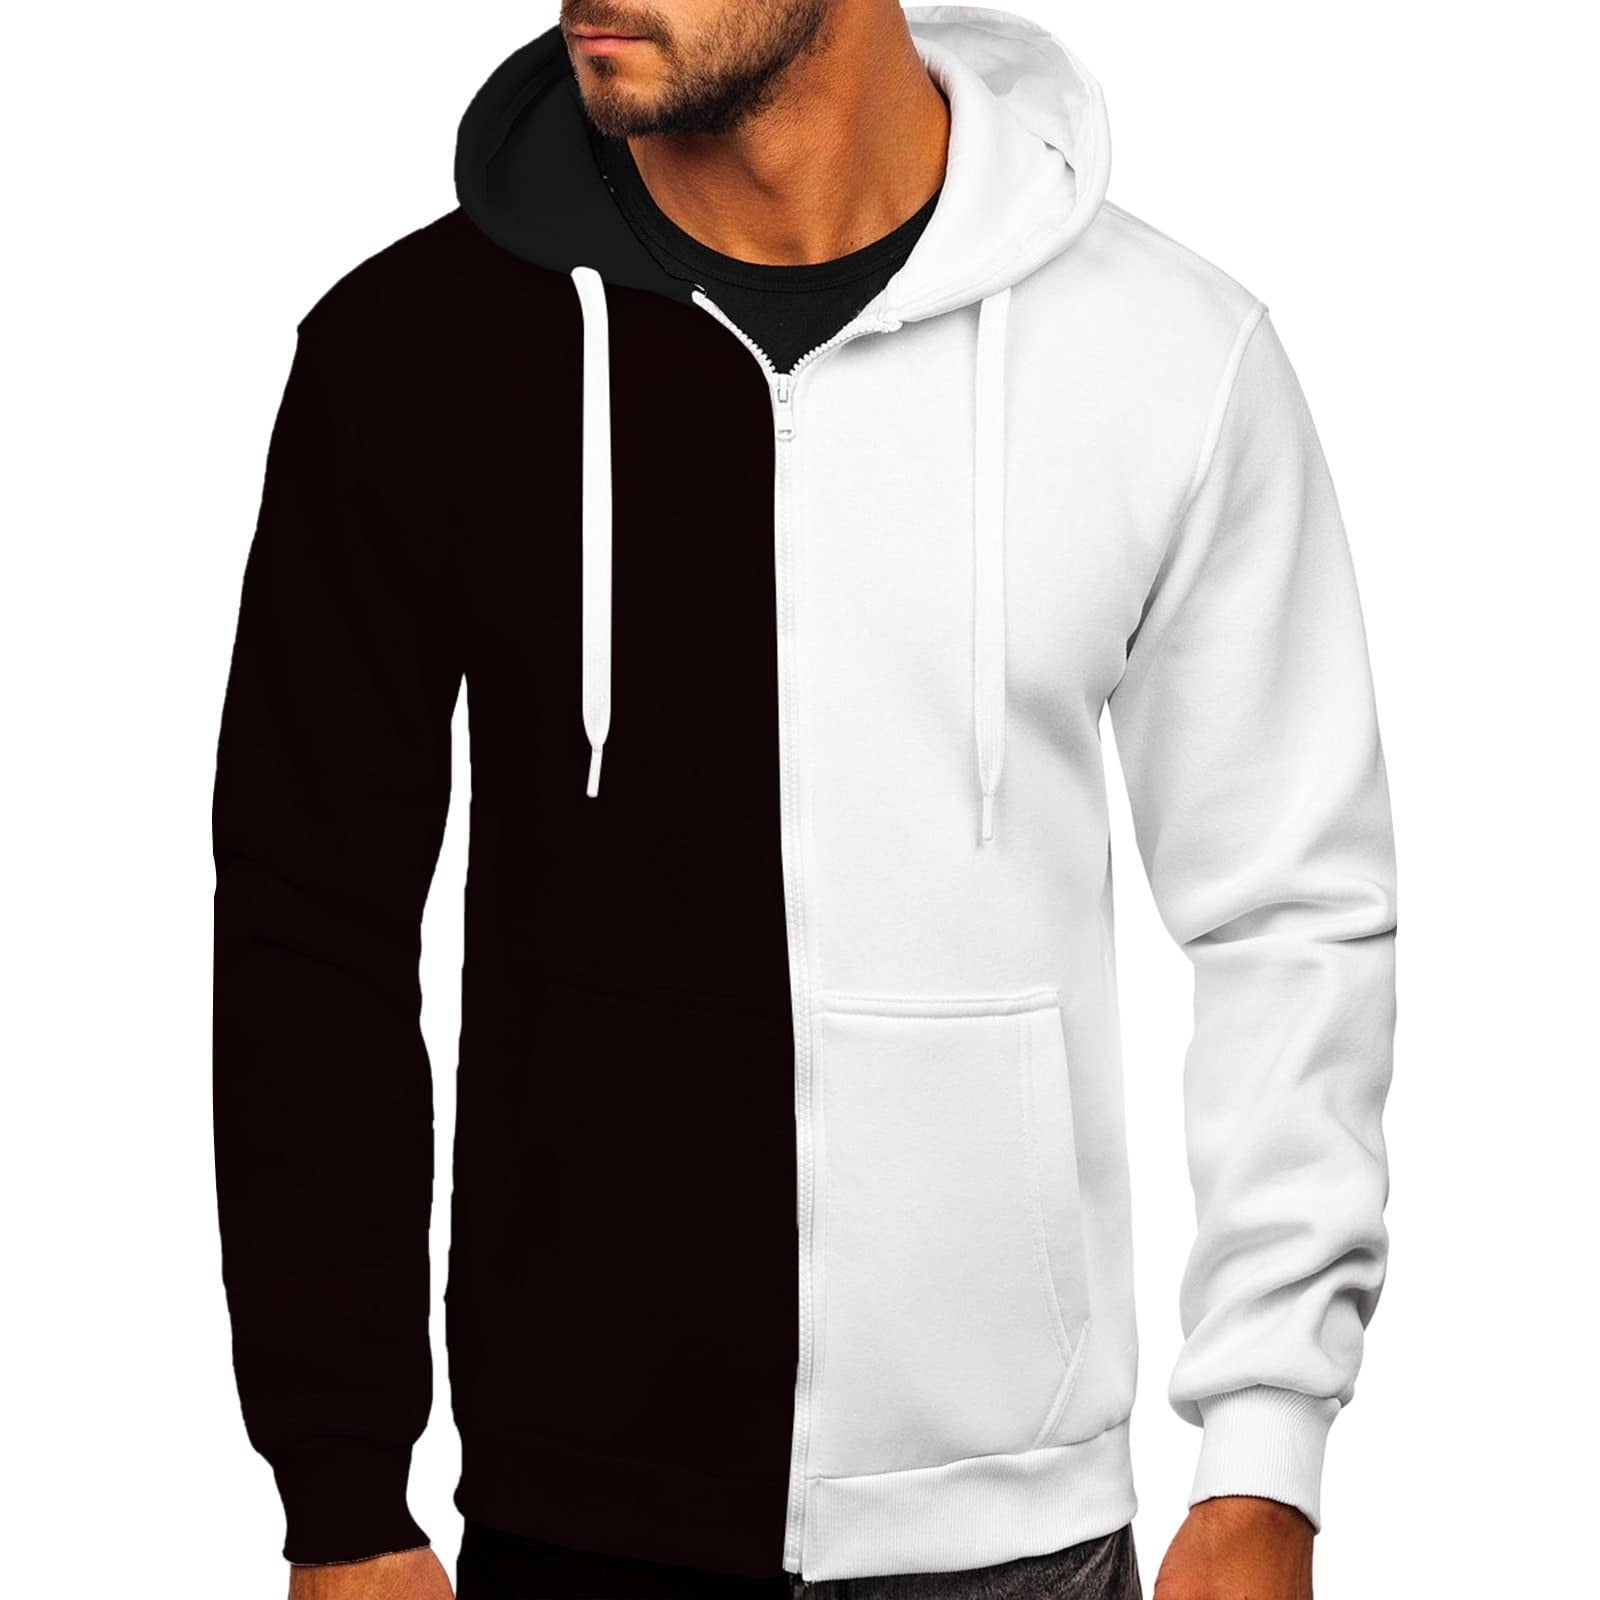 Smart Color Block Pullover Hoodie - Black/Charcoal Heather XXX-Large